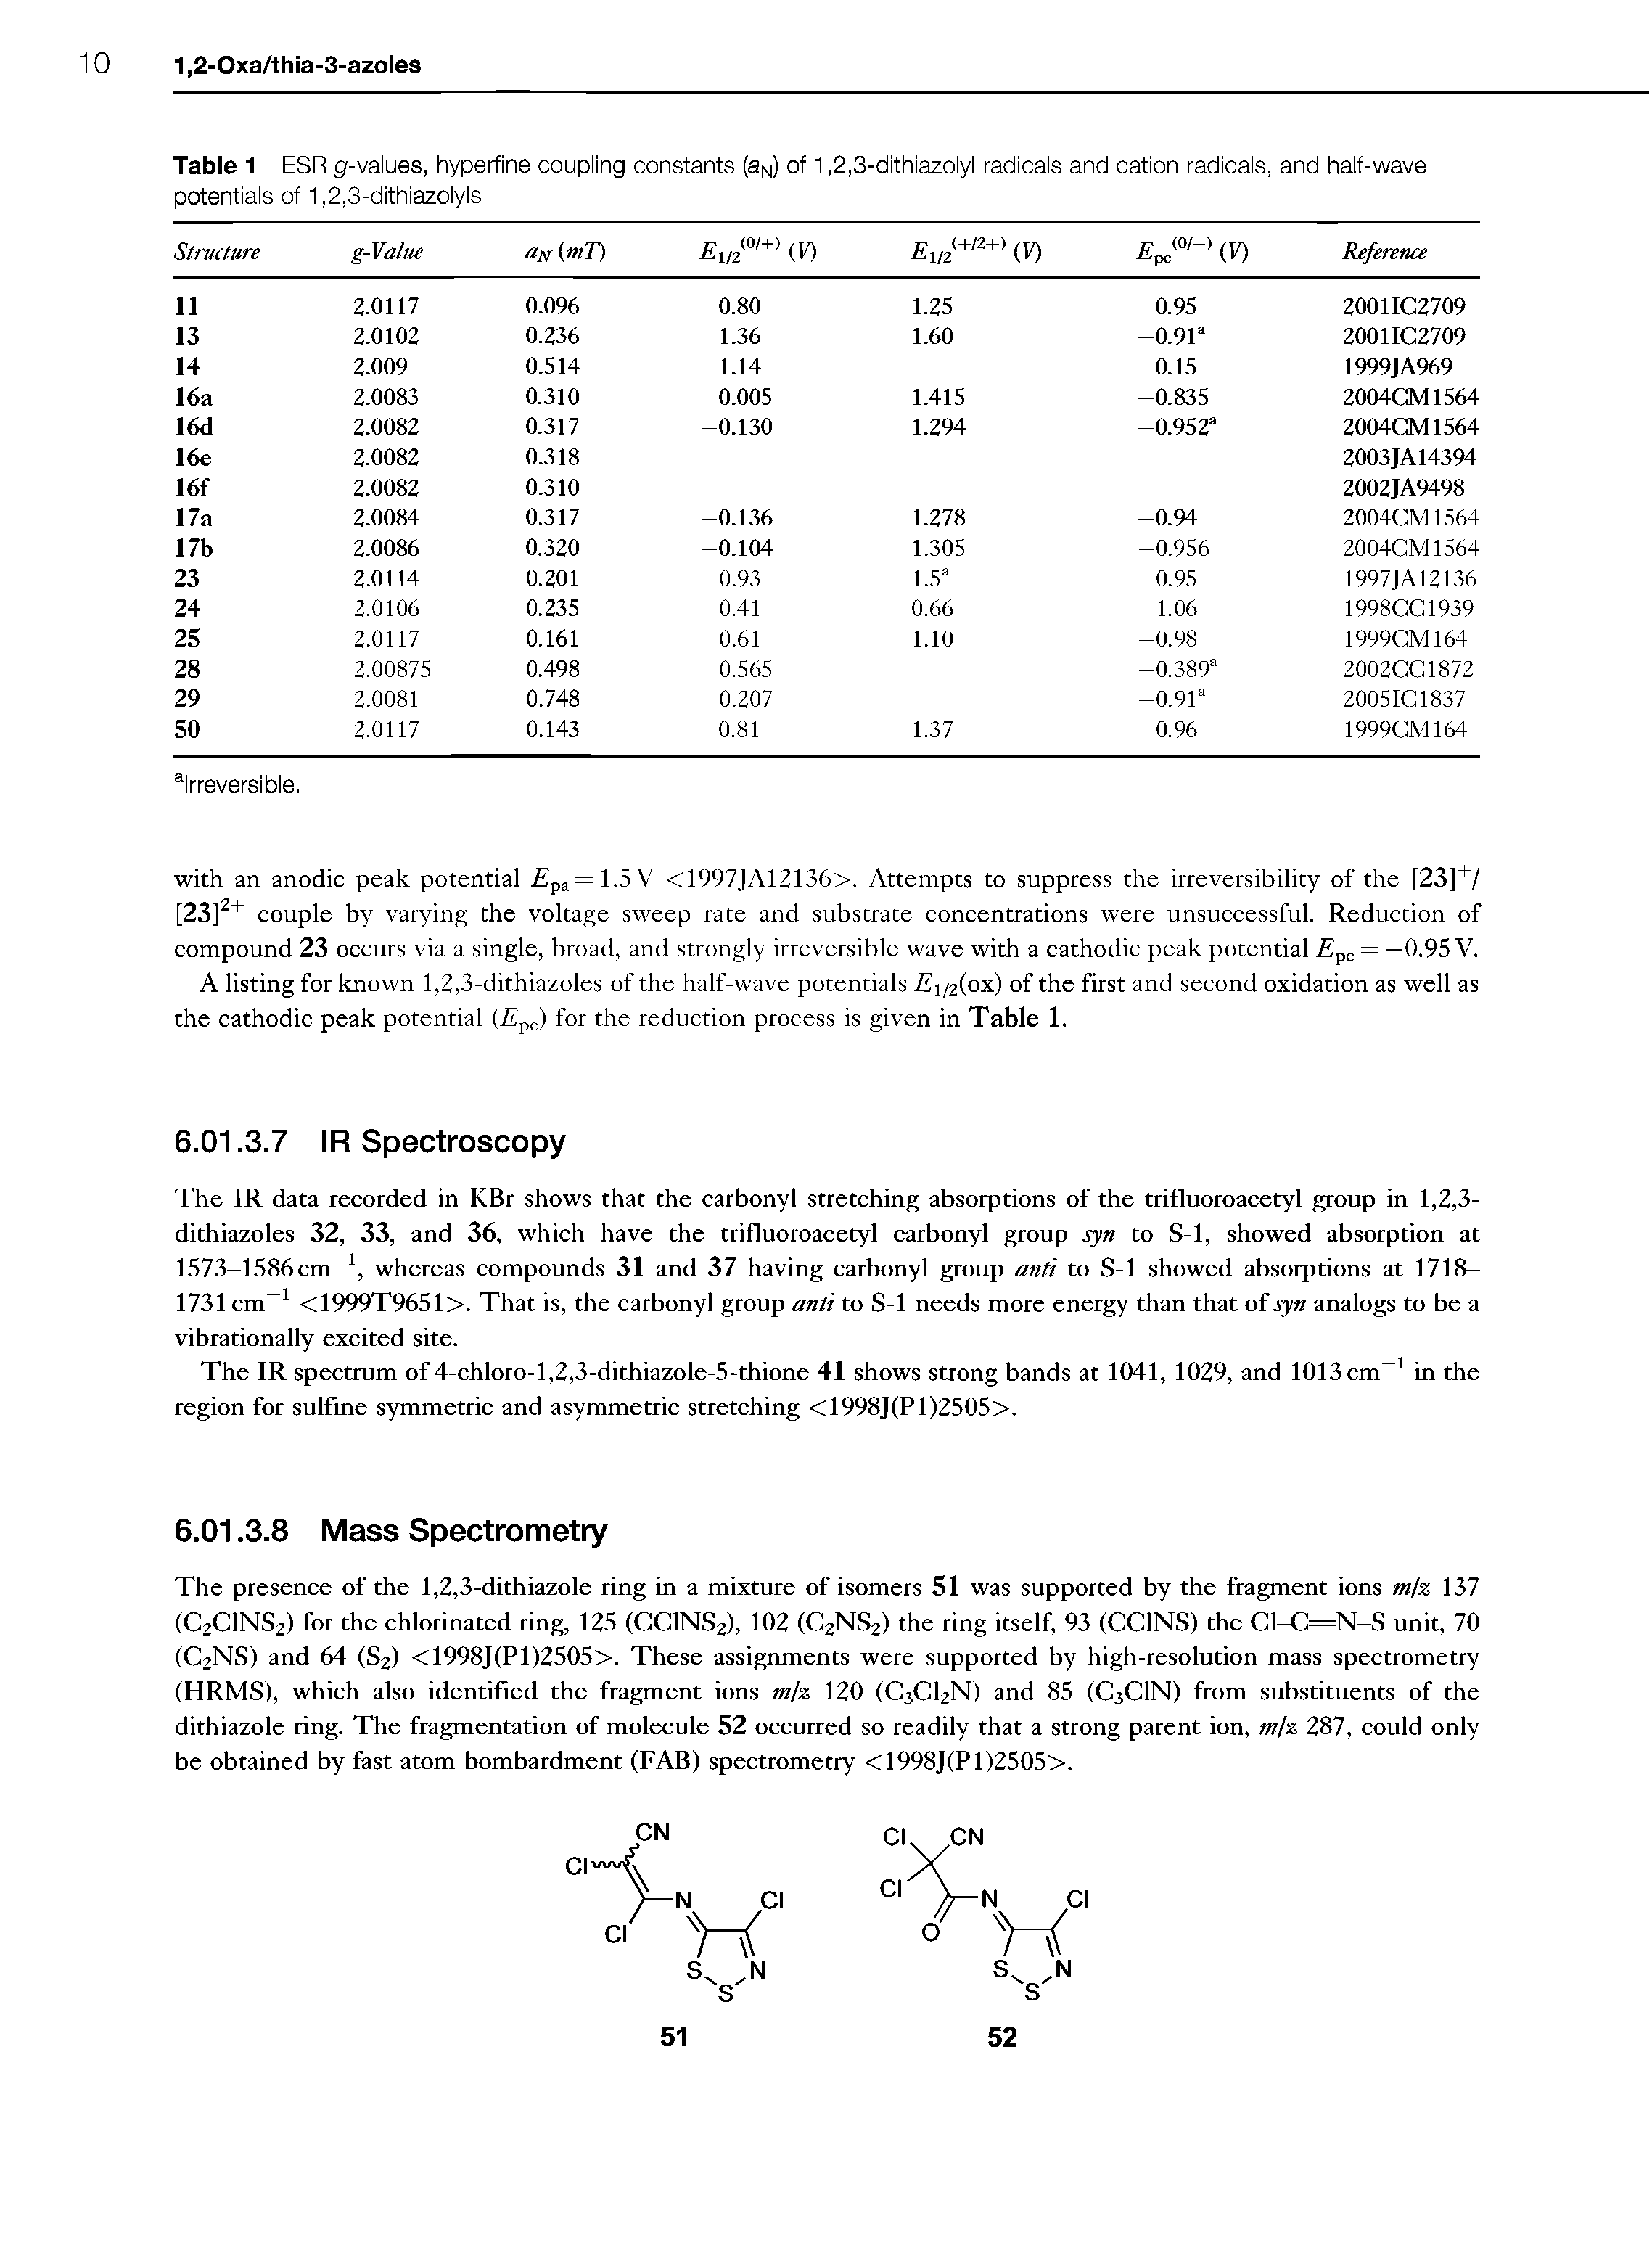 Table 1 ESR g-values, hyperfine coupling constants (aN) of 1,2,3-dithiazolyl radicals and cation radicals, and half-wave potentials of 1,2,3-dithiazolyls...